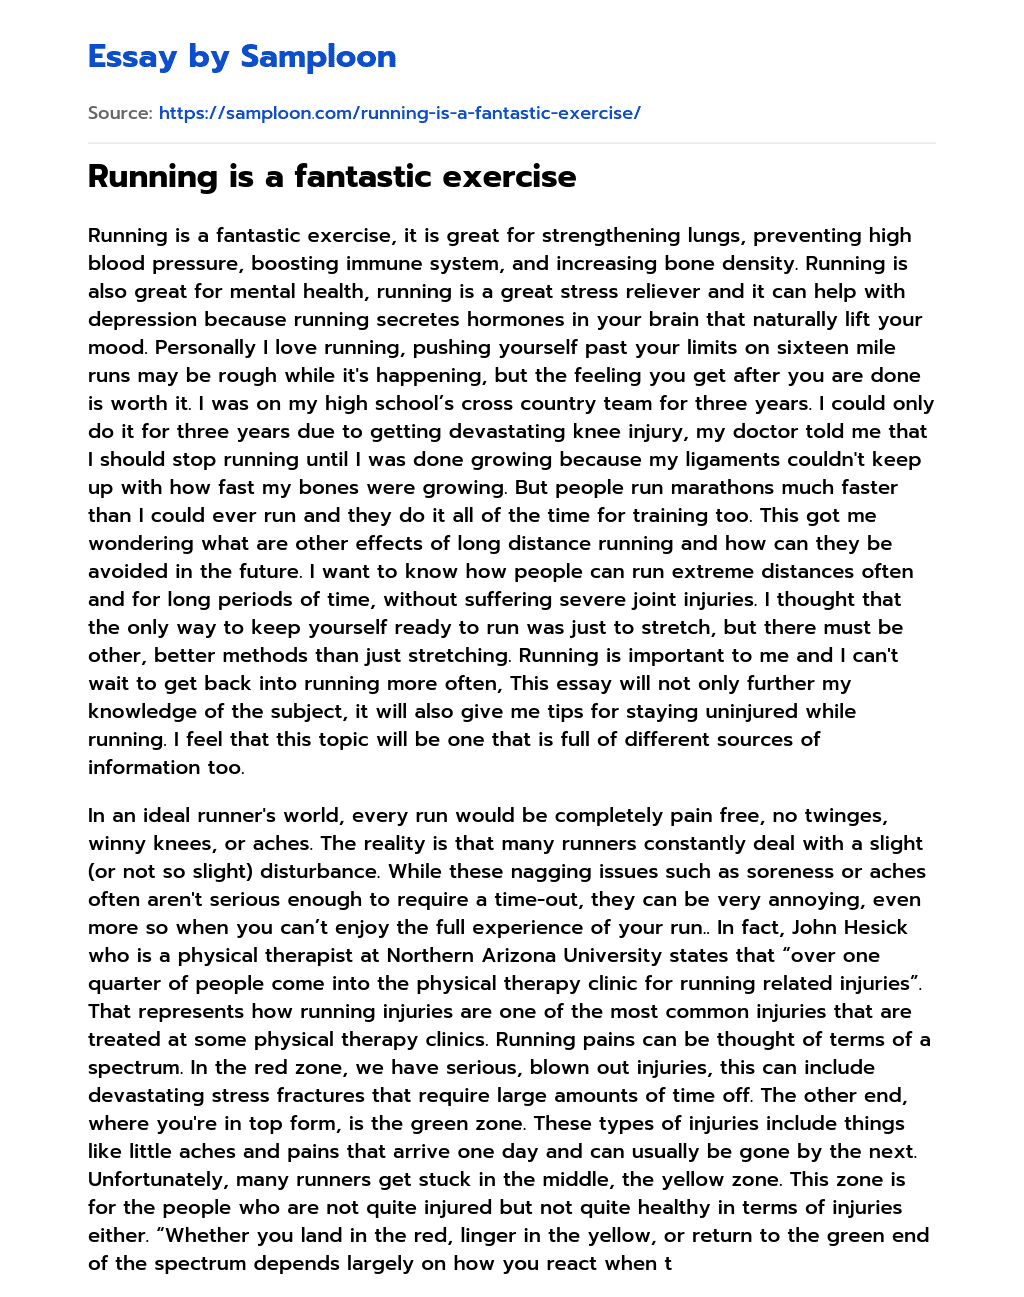 Running is a fantastic exercise essay